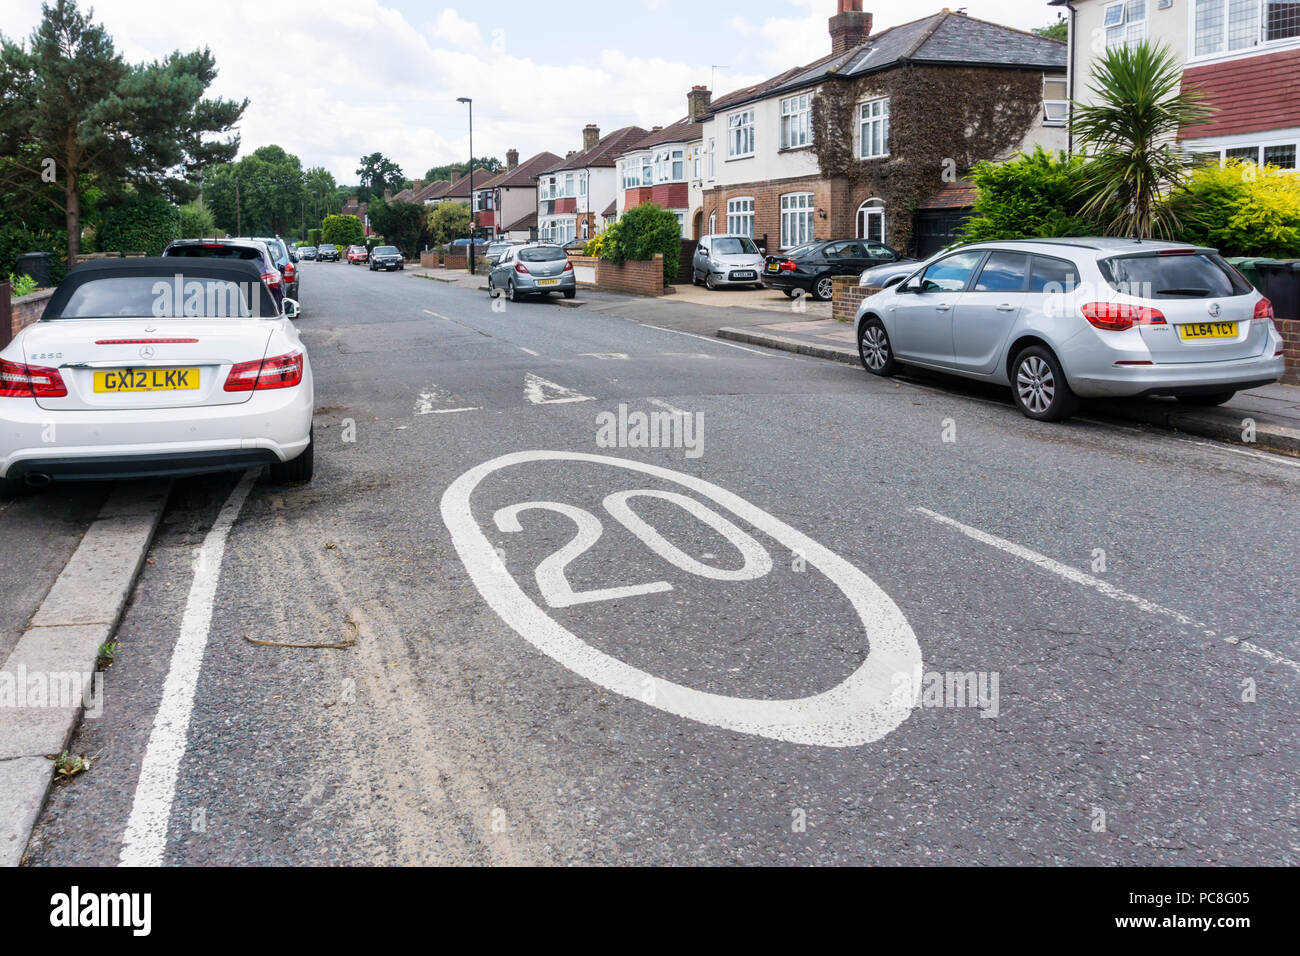 20 mph speed limit marking on road in Lewisham, south London. Stock Photo